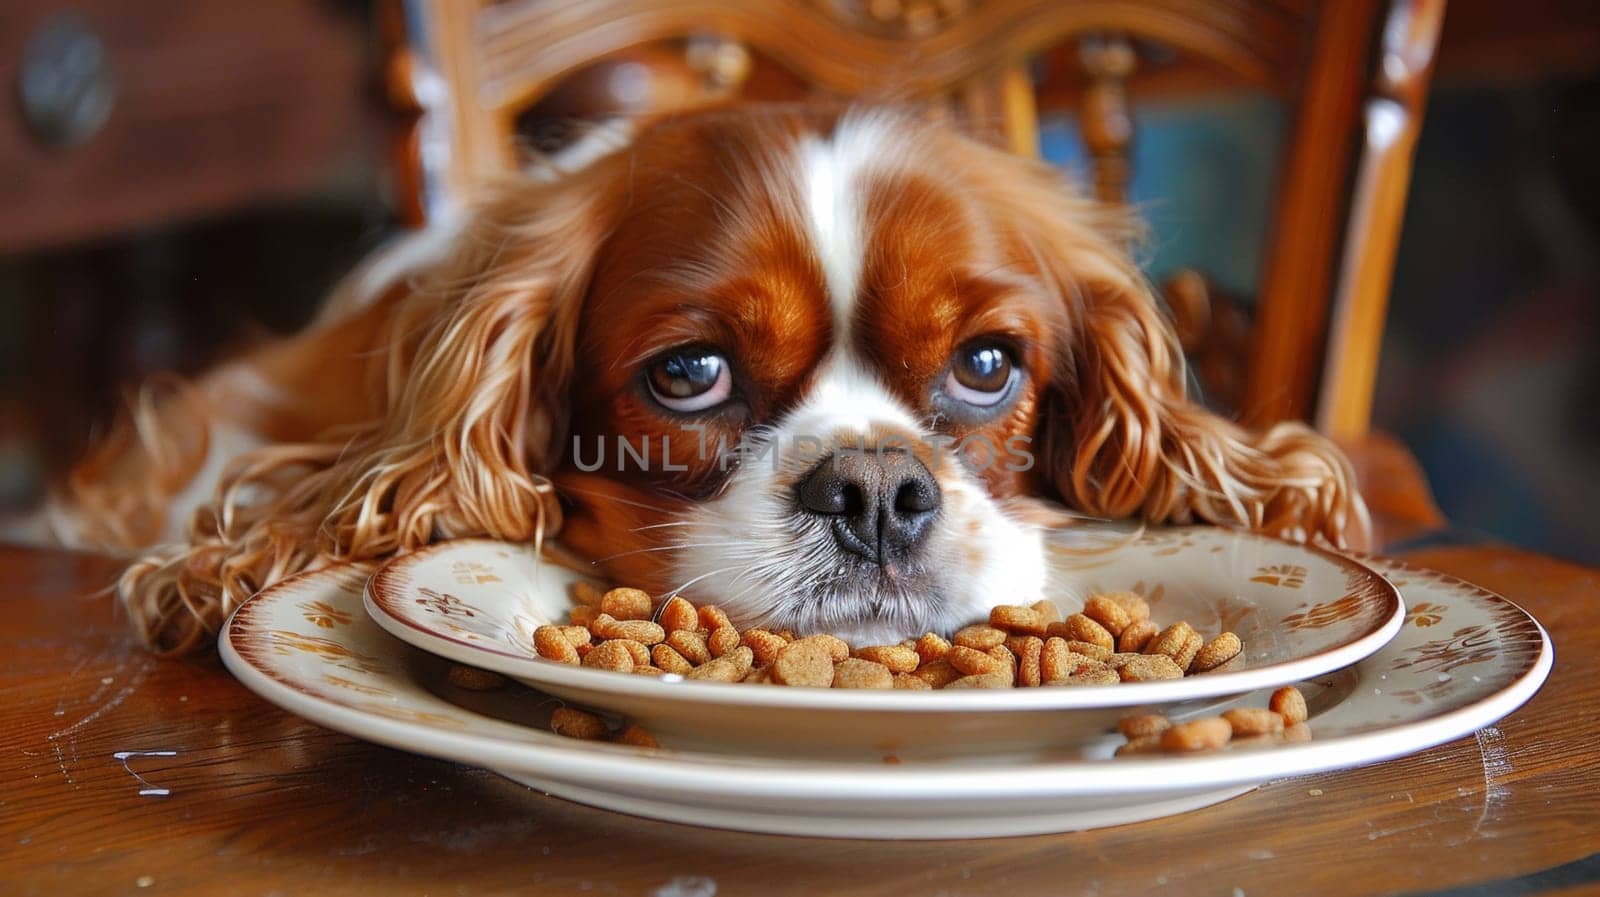 A dog is sitting on a table eating from two bowls, AI by starush